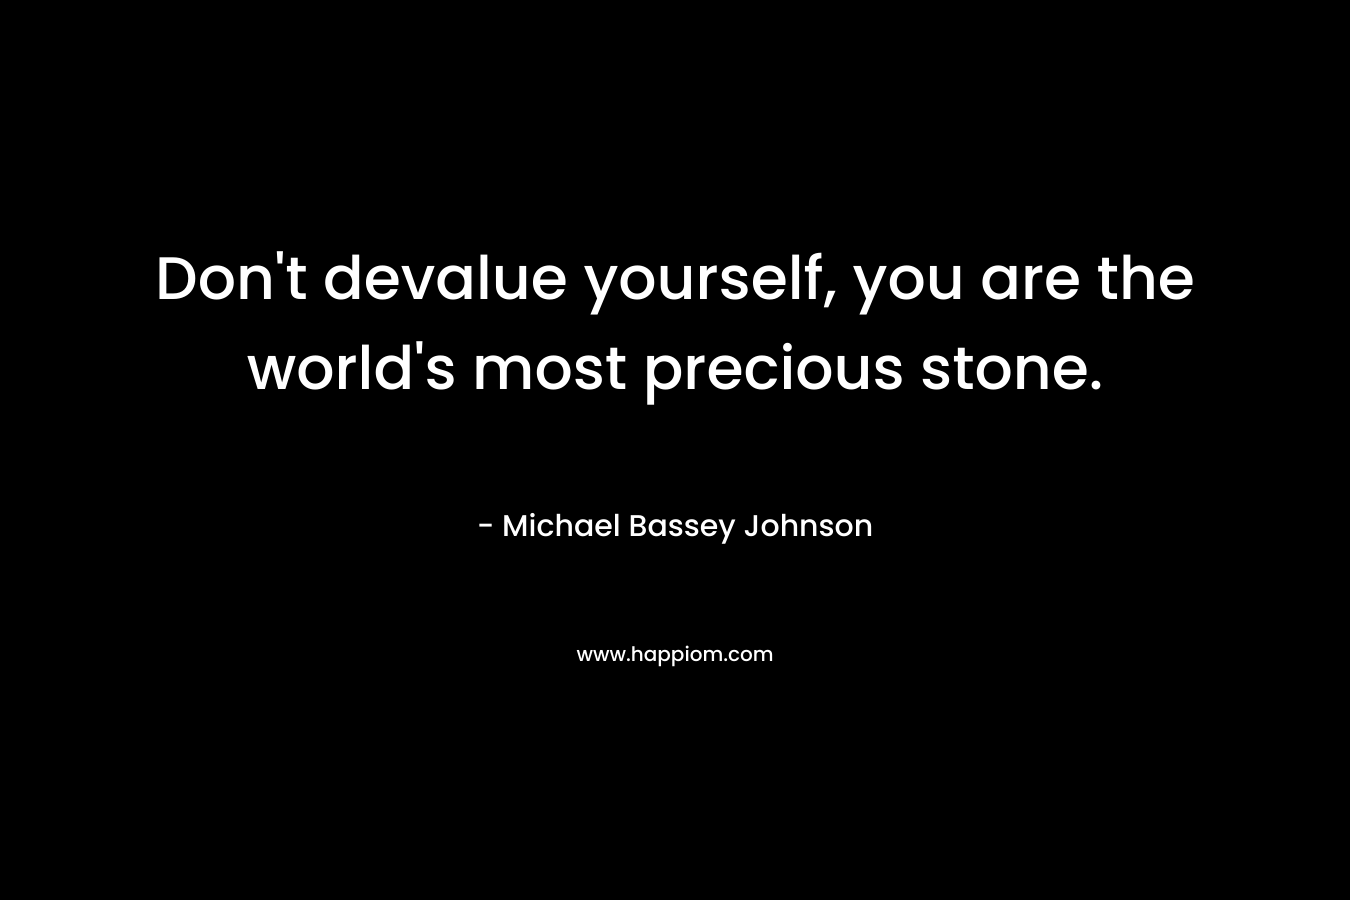 Don't devalue yourself, you are the world's most precious stone.